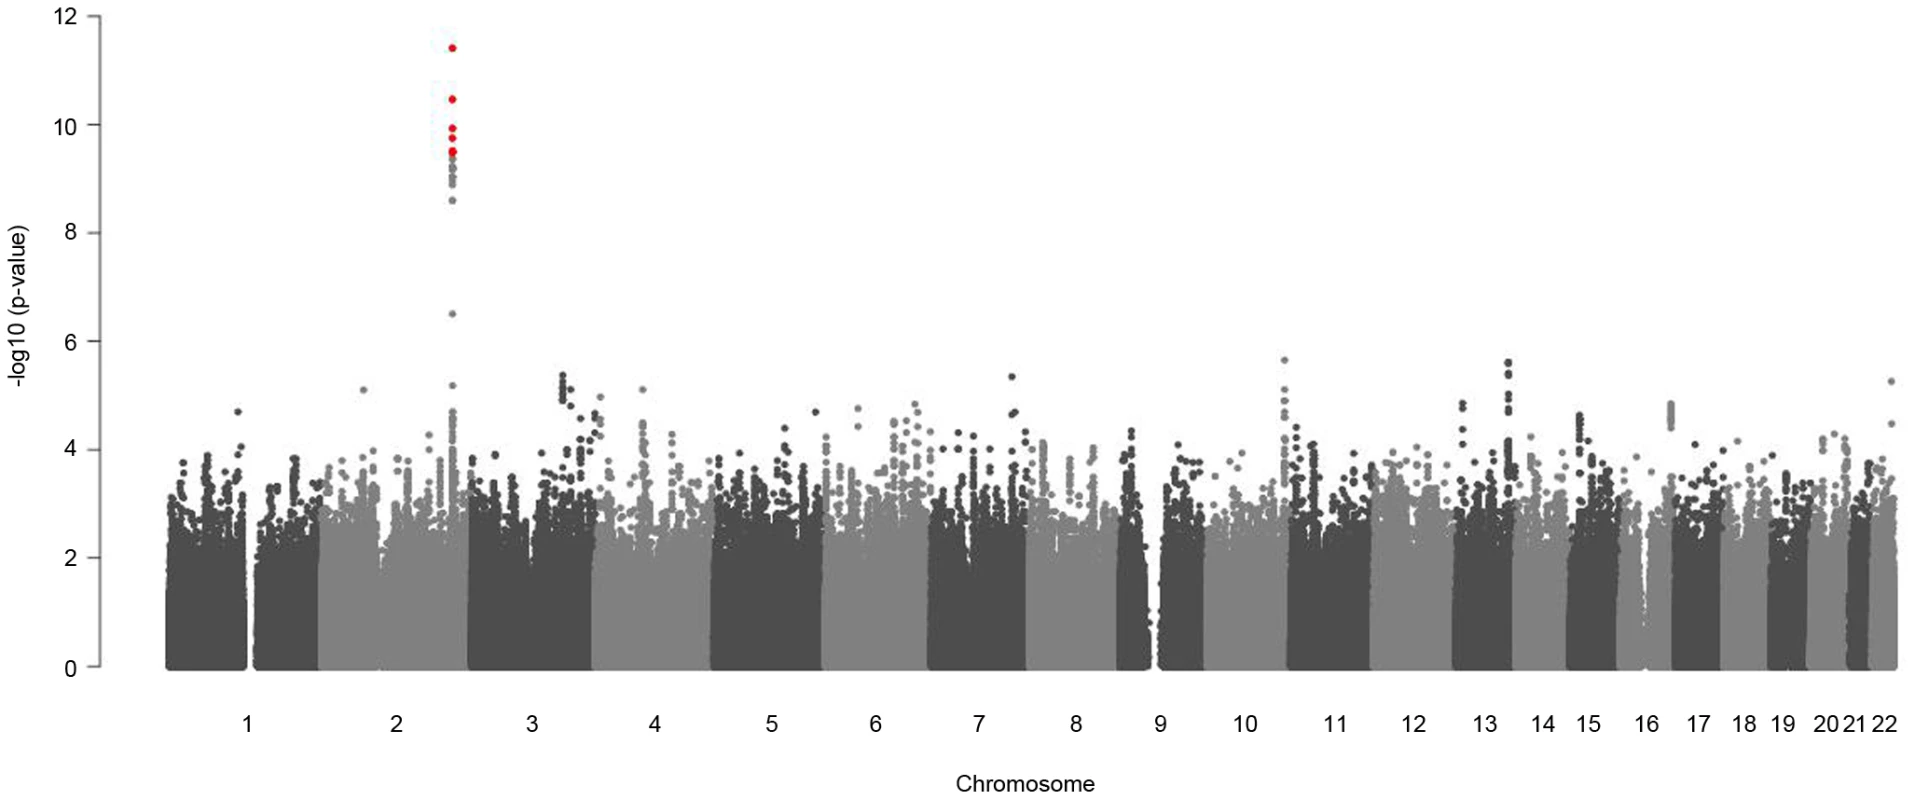 Manhattan plots for gender-specific genome-wide beta-differences for the metabolite glycine.